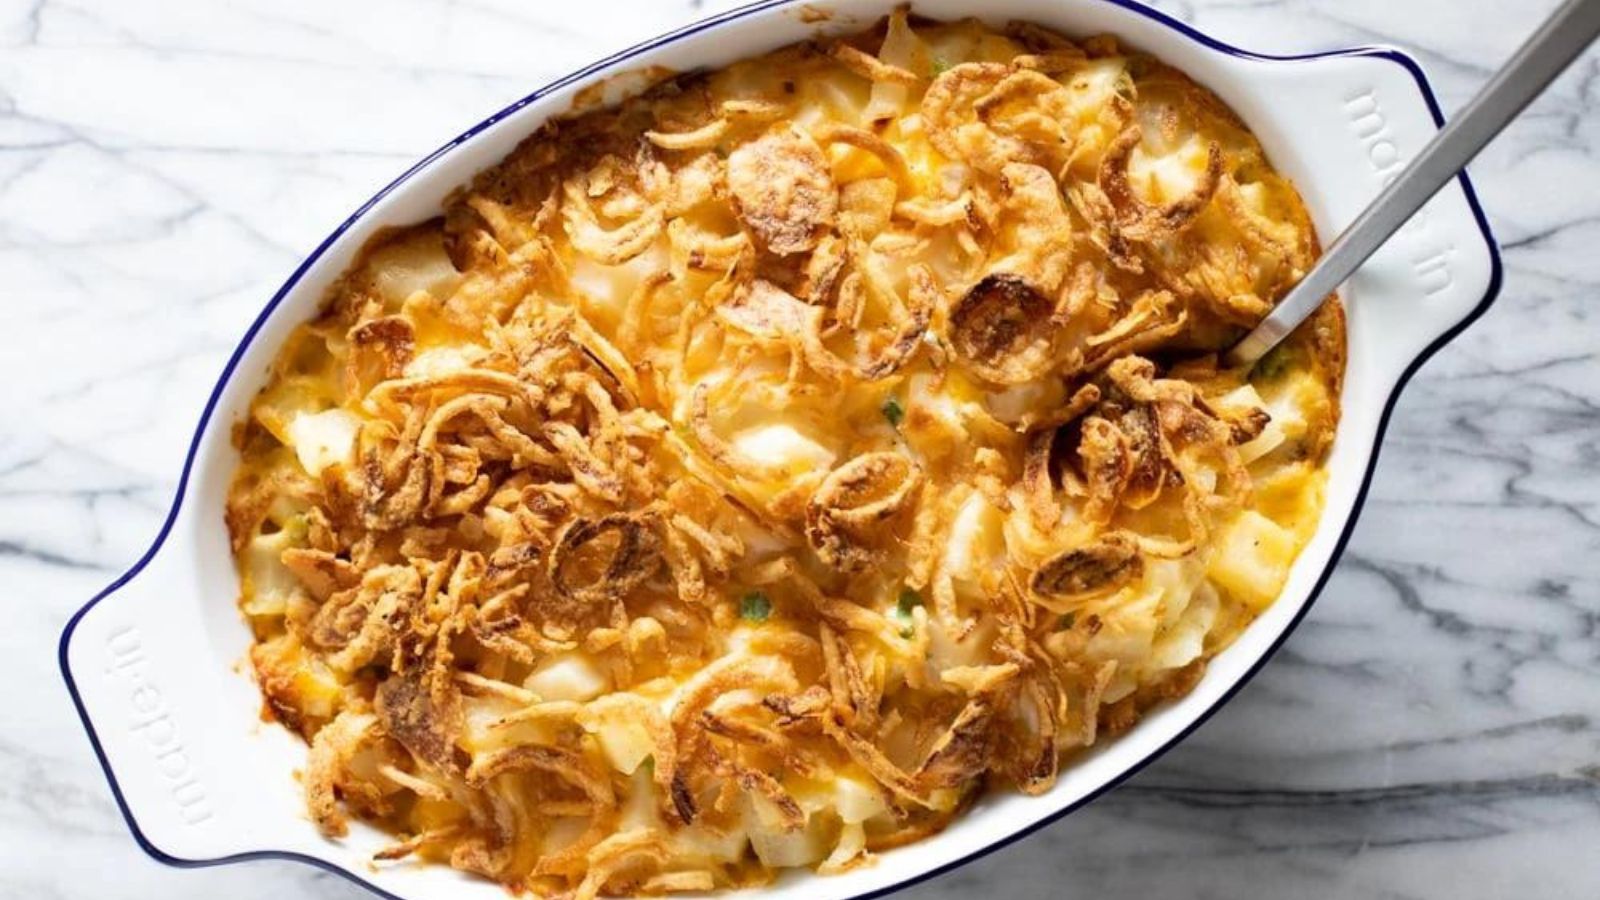 24 Winter Potluck Recipes That’ll Win Every Time